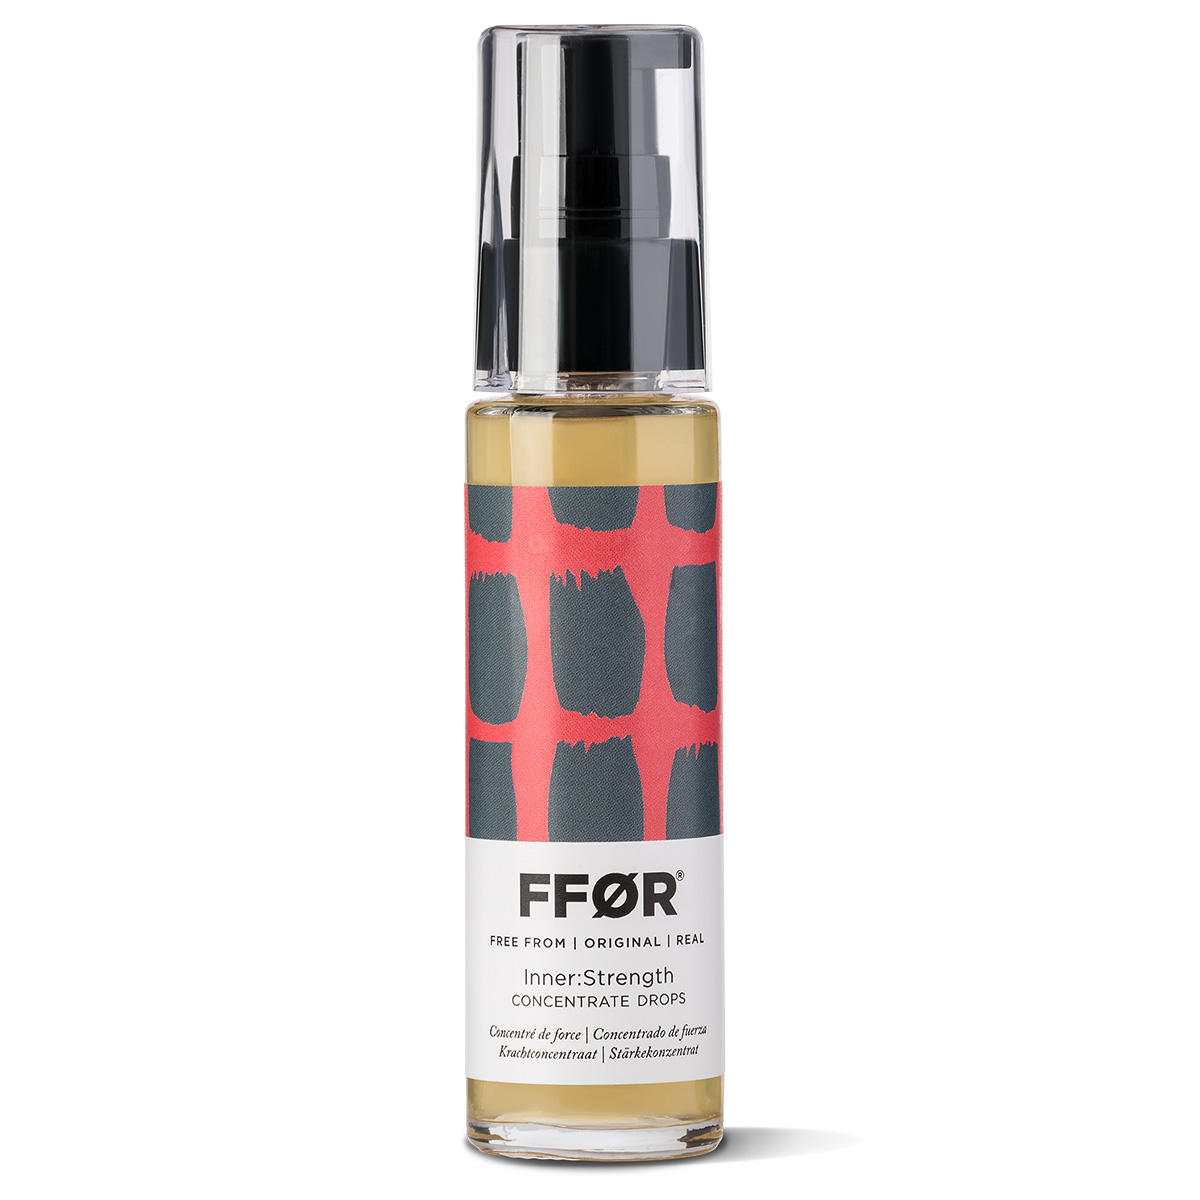 FFOR INNER:Strength Concentrate Drops  30 ml - 1